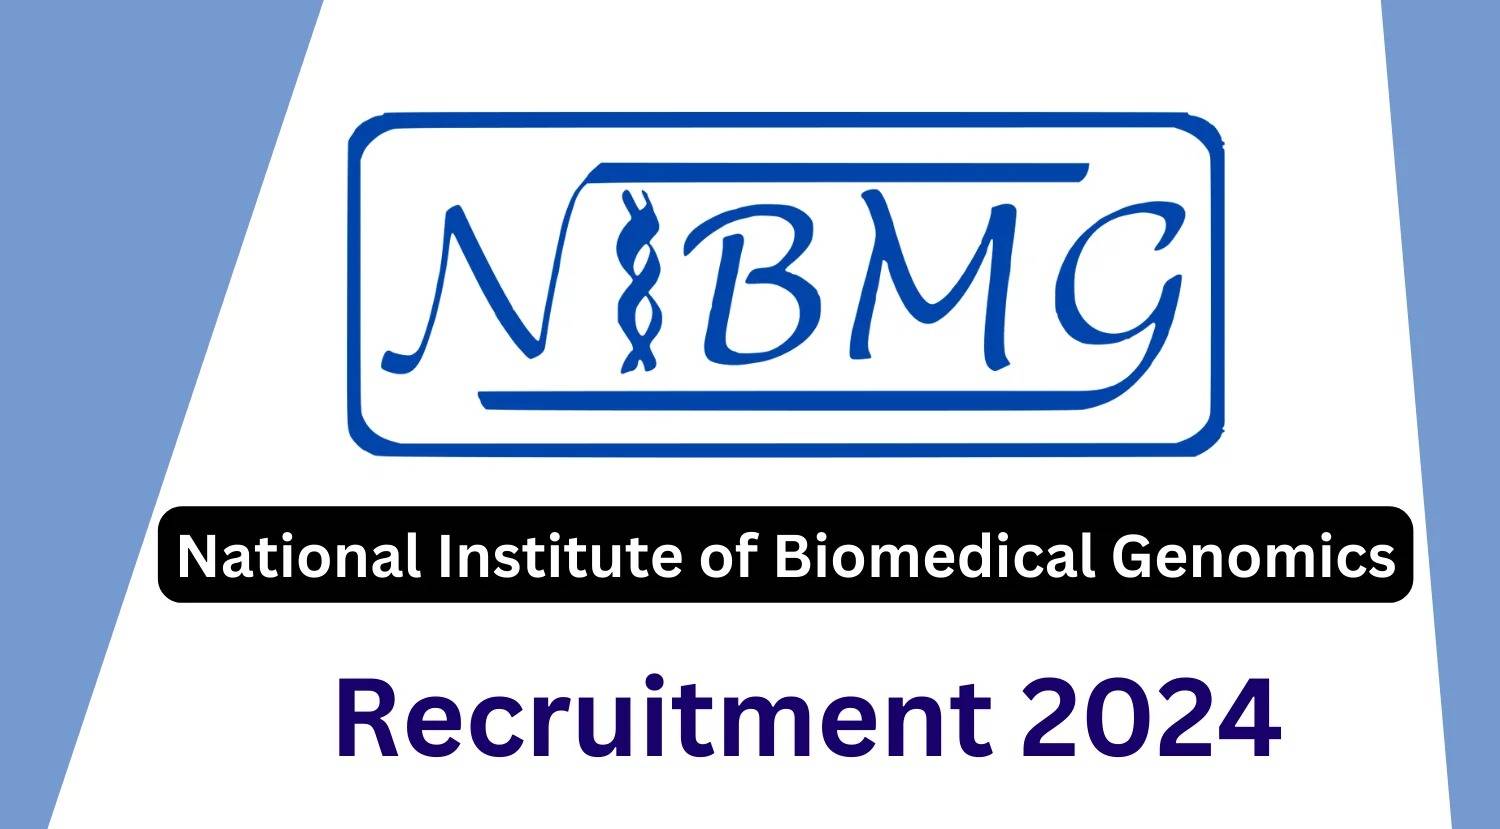 NIBMG Recruitment 2024: Vacancy for Resident Medical Officer Post, Verify Eligibility Criteria and Application Process